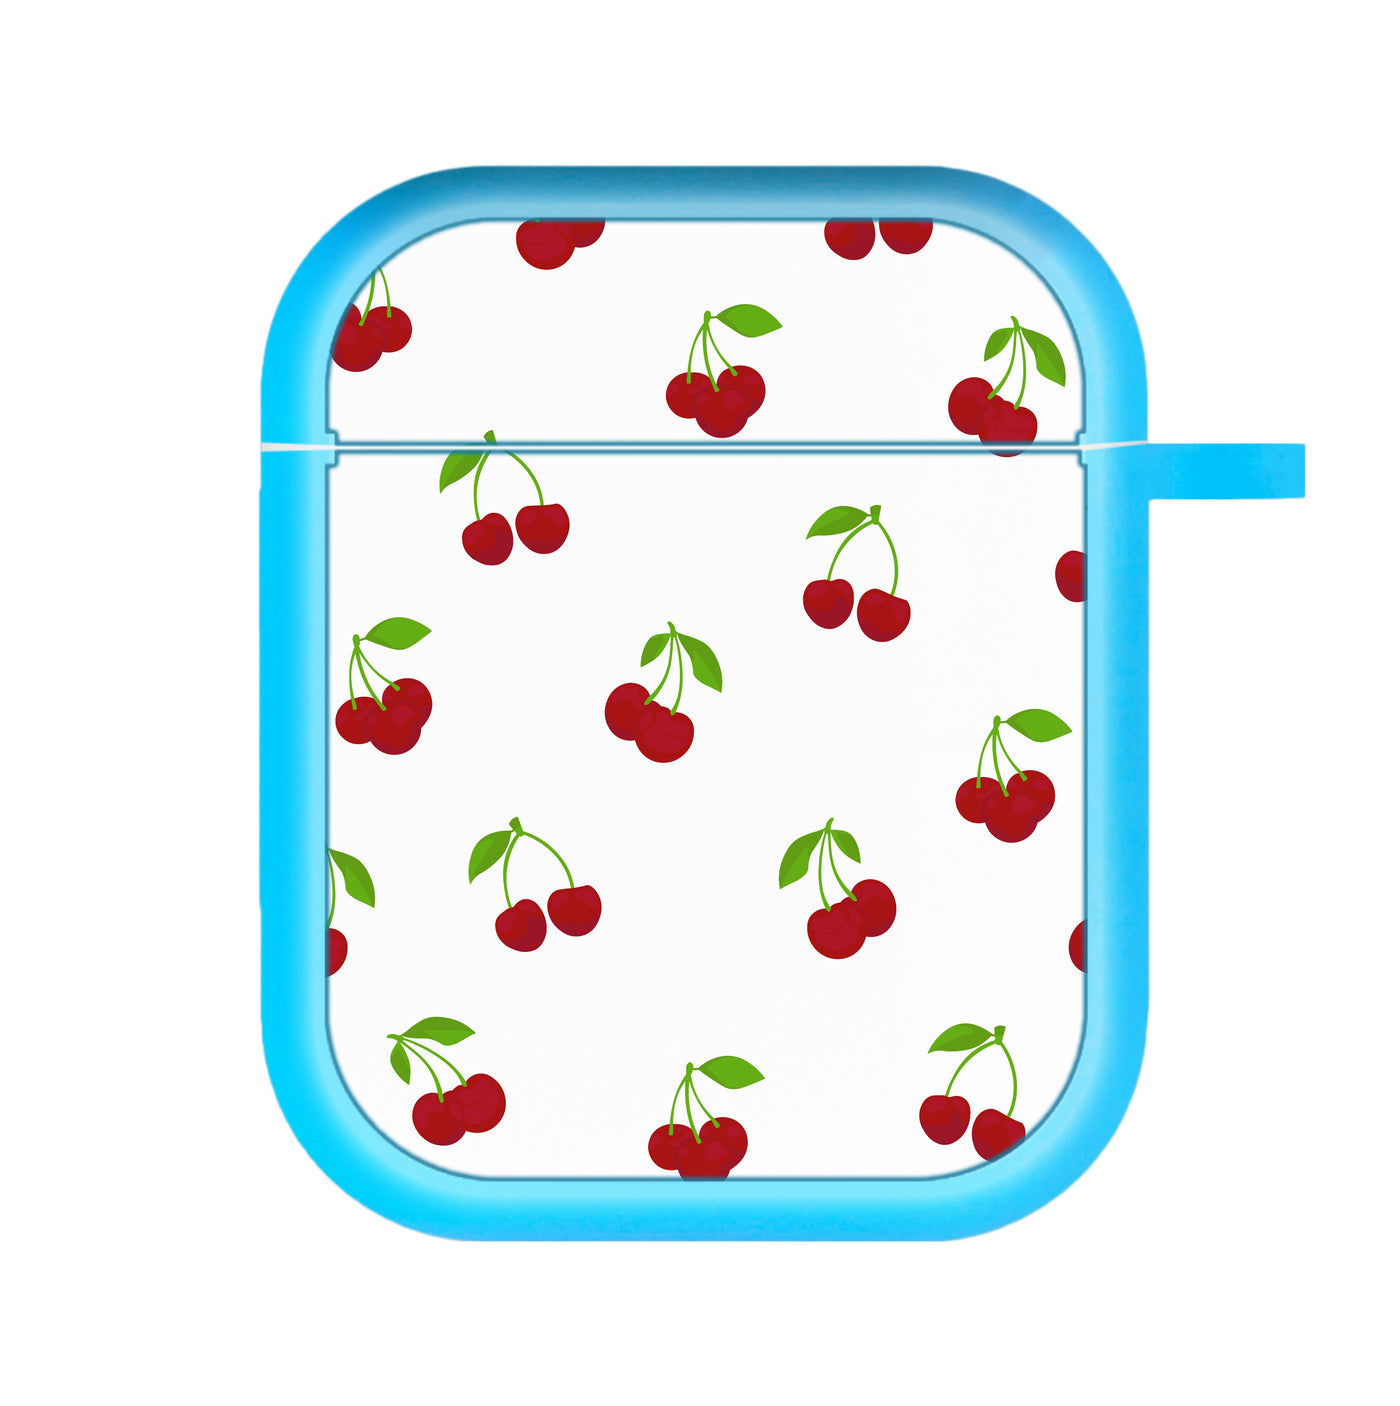 Cherries - Fruit Patterns AirPods Case